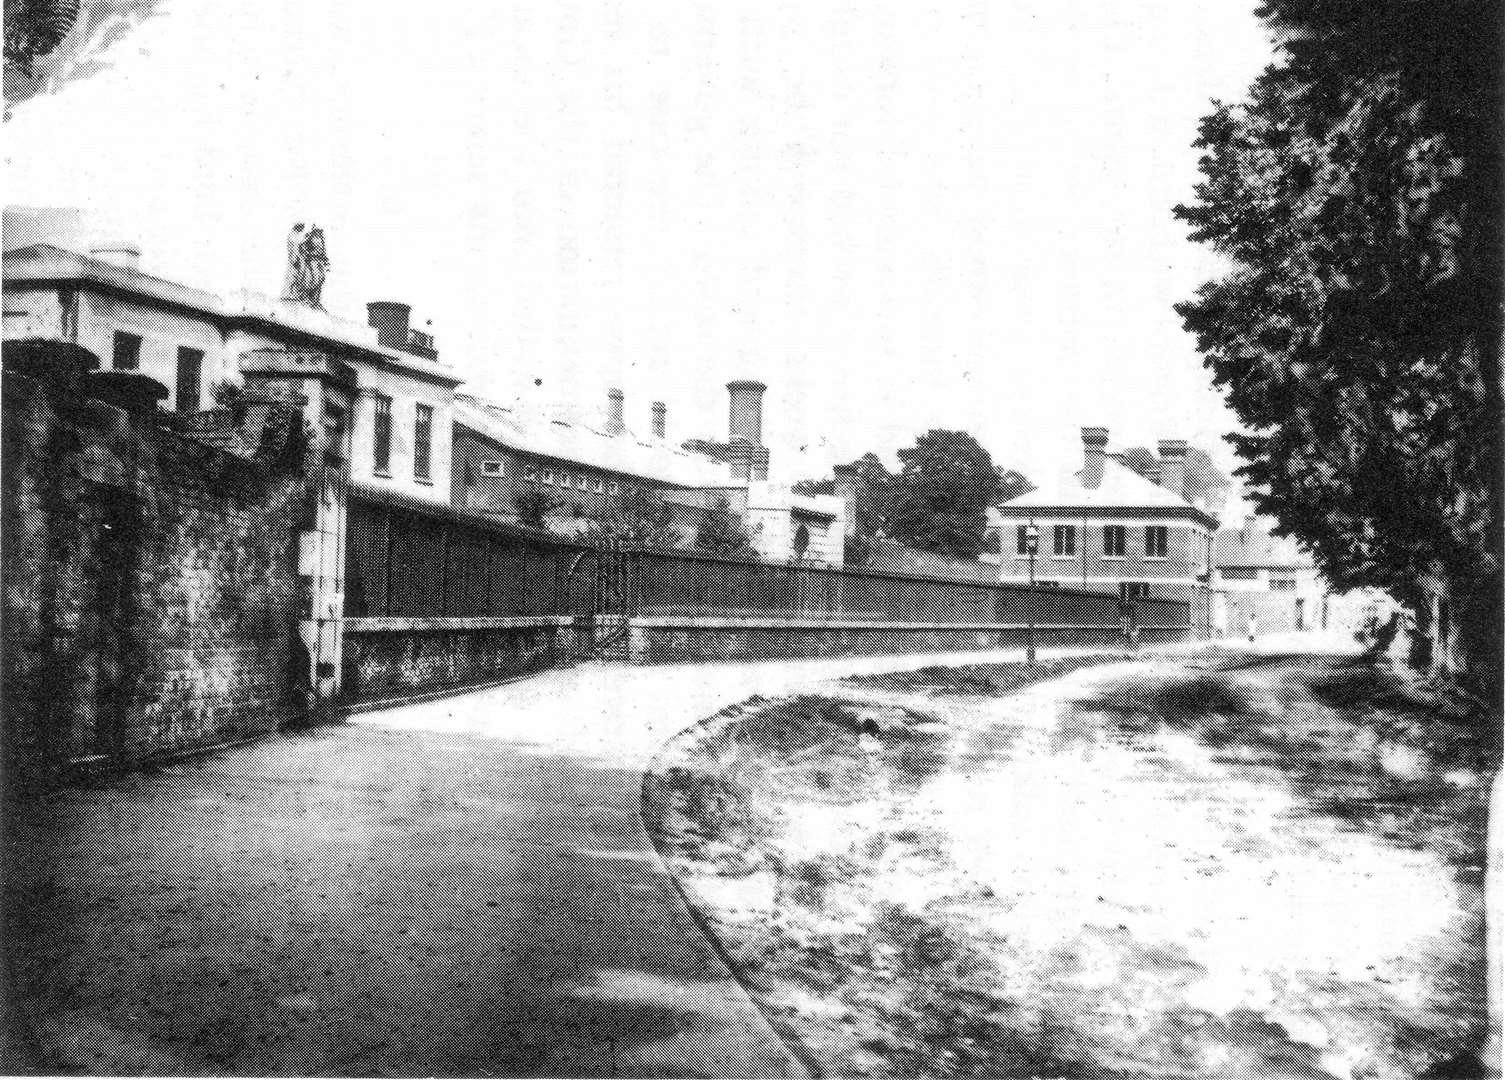 An image of Canterbury prison taken in the 1880s. Picture: Dave Lambourne